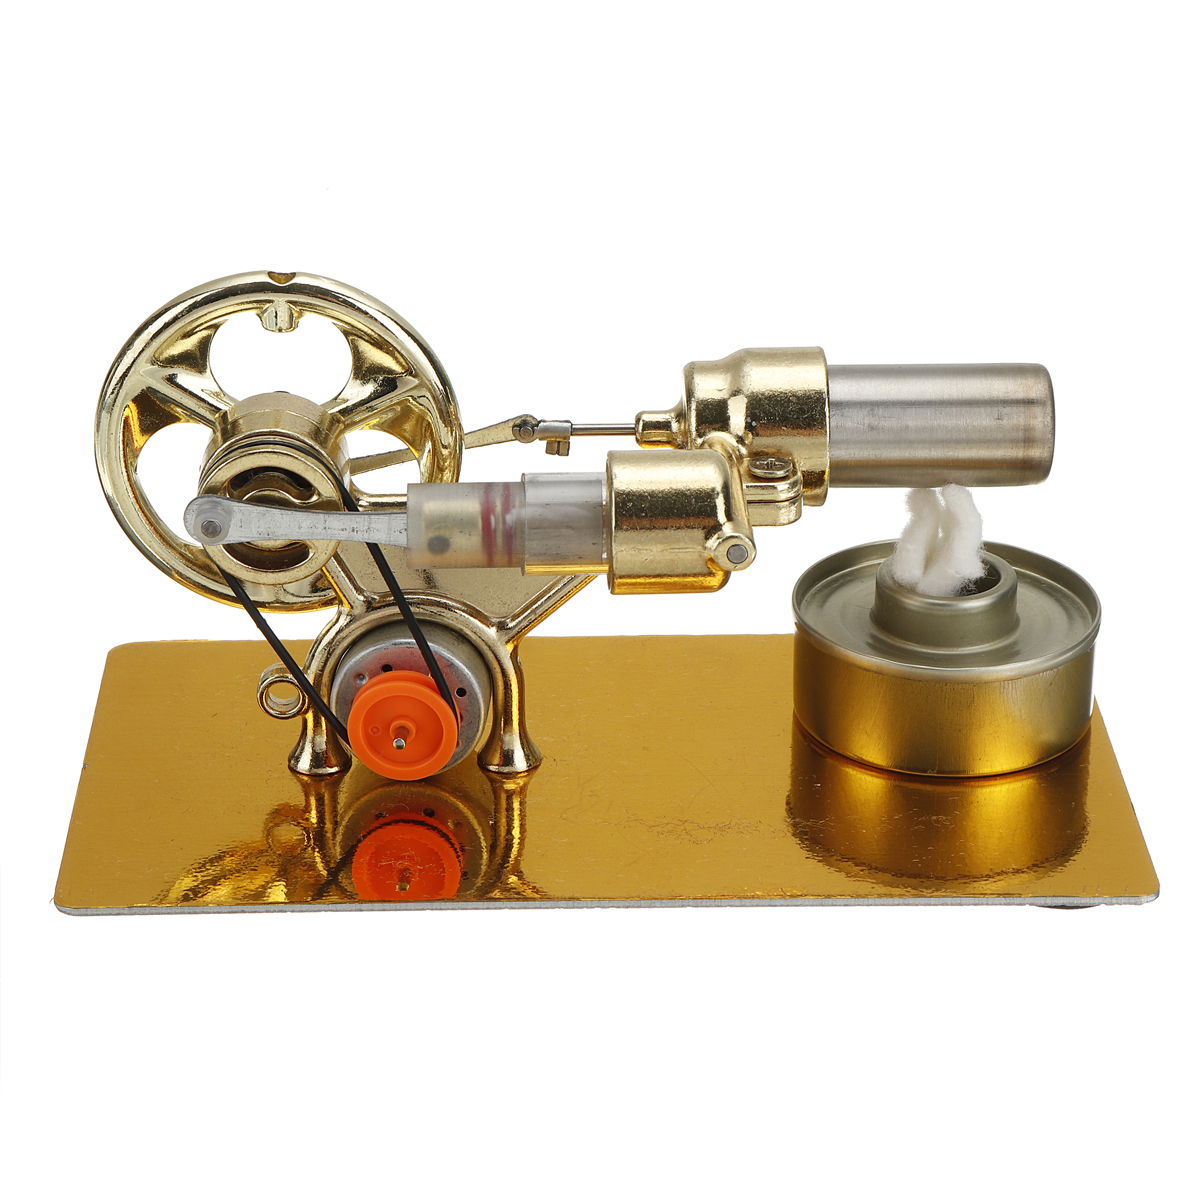 1PC-16-x-85-x-11-cm--Physical-Science-DIY-Kits-Stirling-Engine-Model-with-Parts-1939762-3